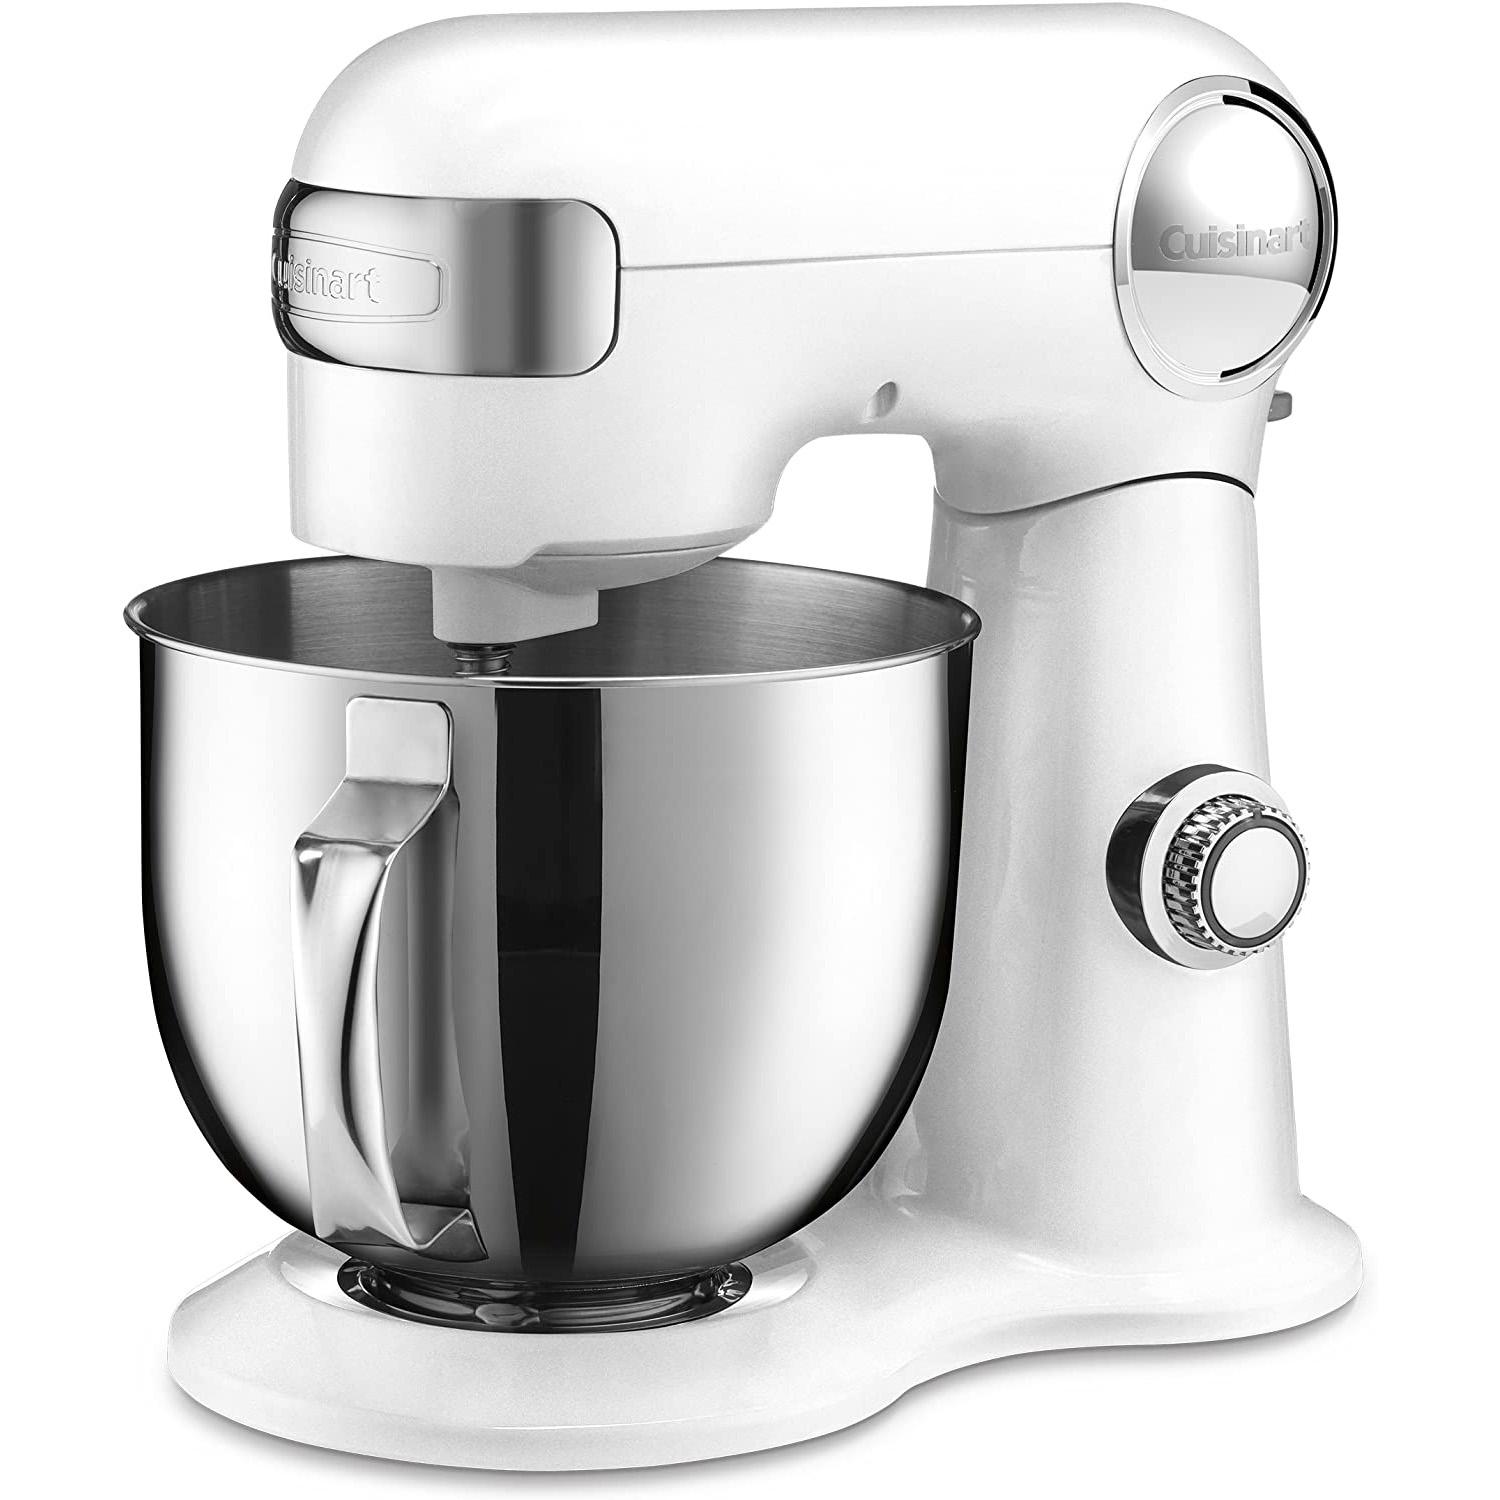 Cuisinart SM-50 5.5Q Stand Mixer for $124.99 Shipped